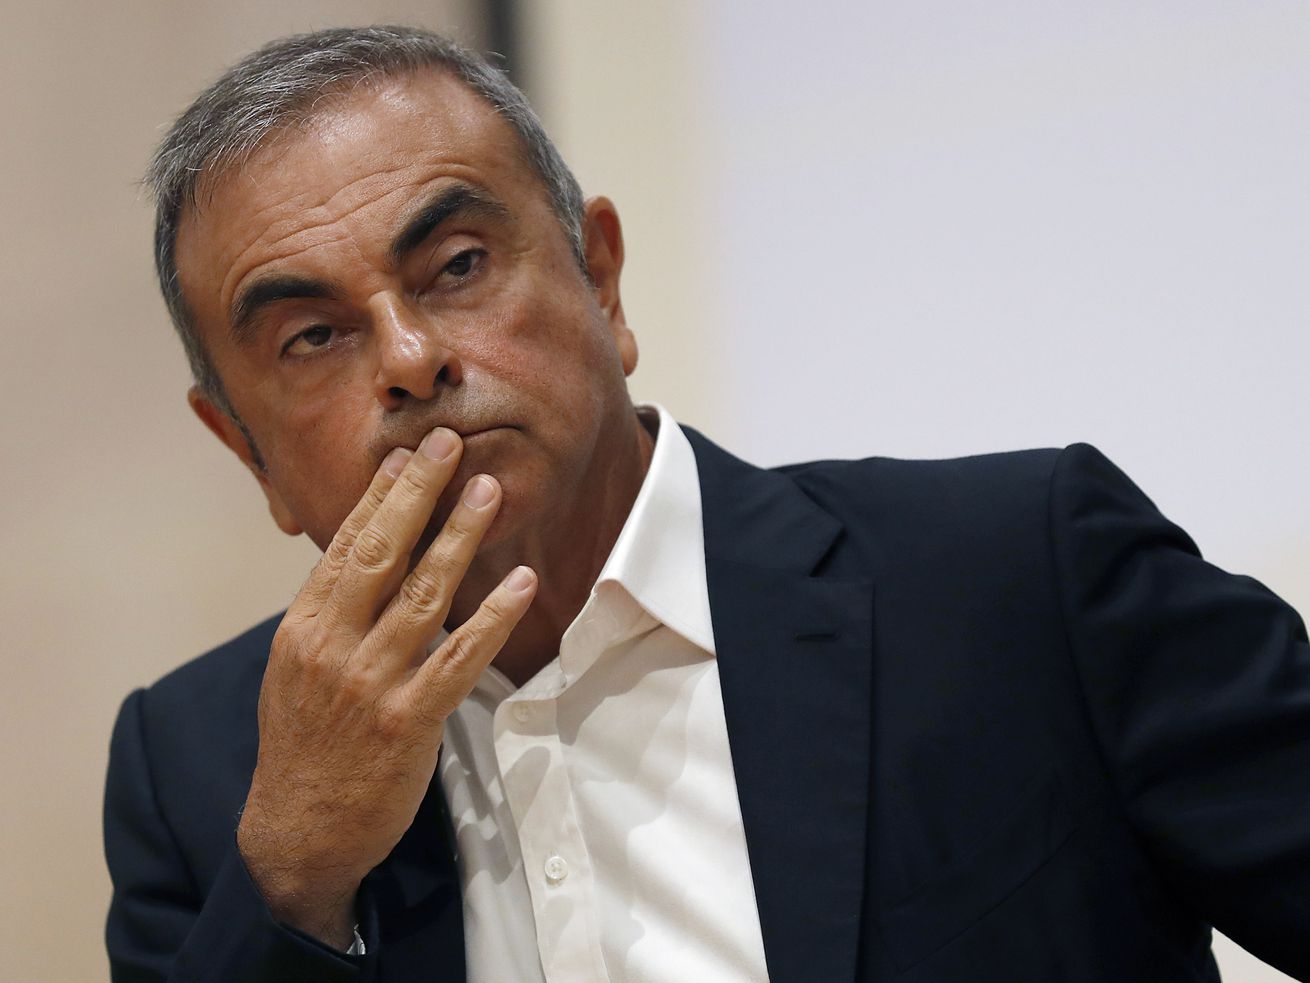 In this Sept. 29, 2020, file photo, former Nissan Motor Co. Chairman Carlos Ghosn holds a press conference at the Maronite Christian Holy Spirit University of Kaslik, as he launches an initiative to help Lebanon that is undergoing a severe economic and financial crisis, in Kaslik, north of Beirut, Lebanon. 